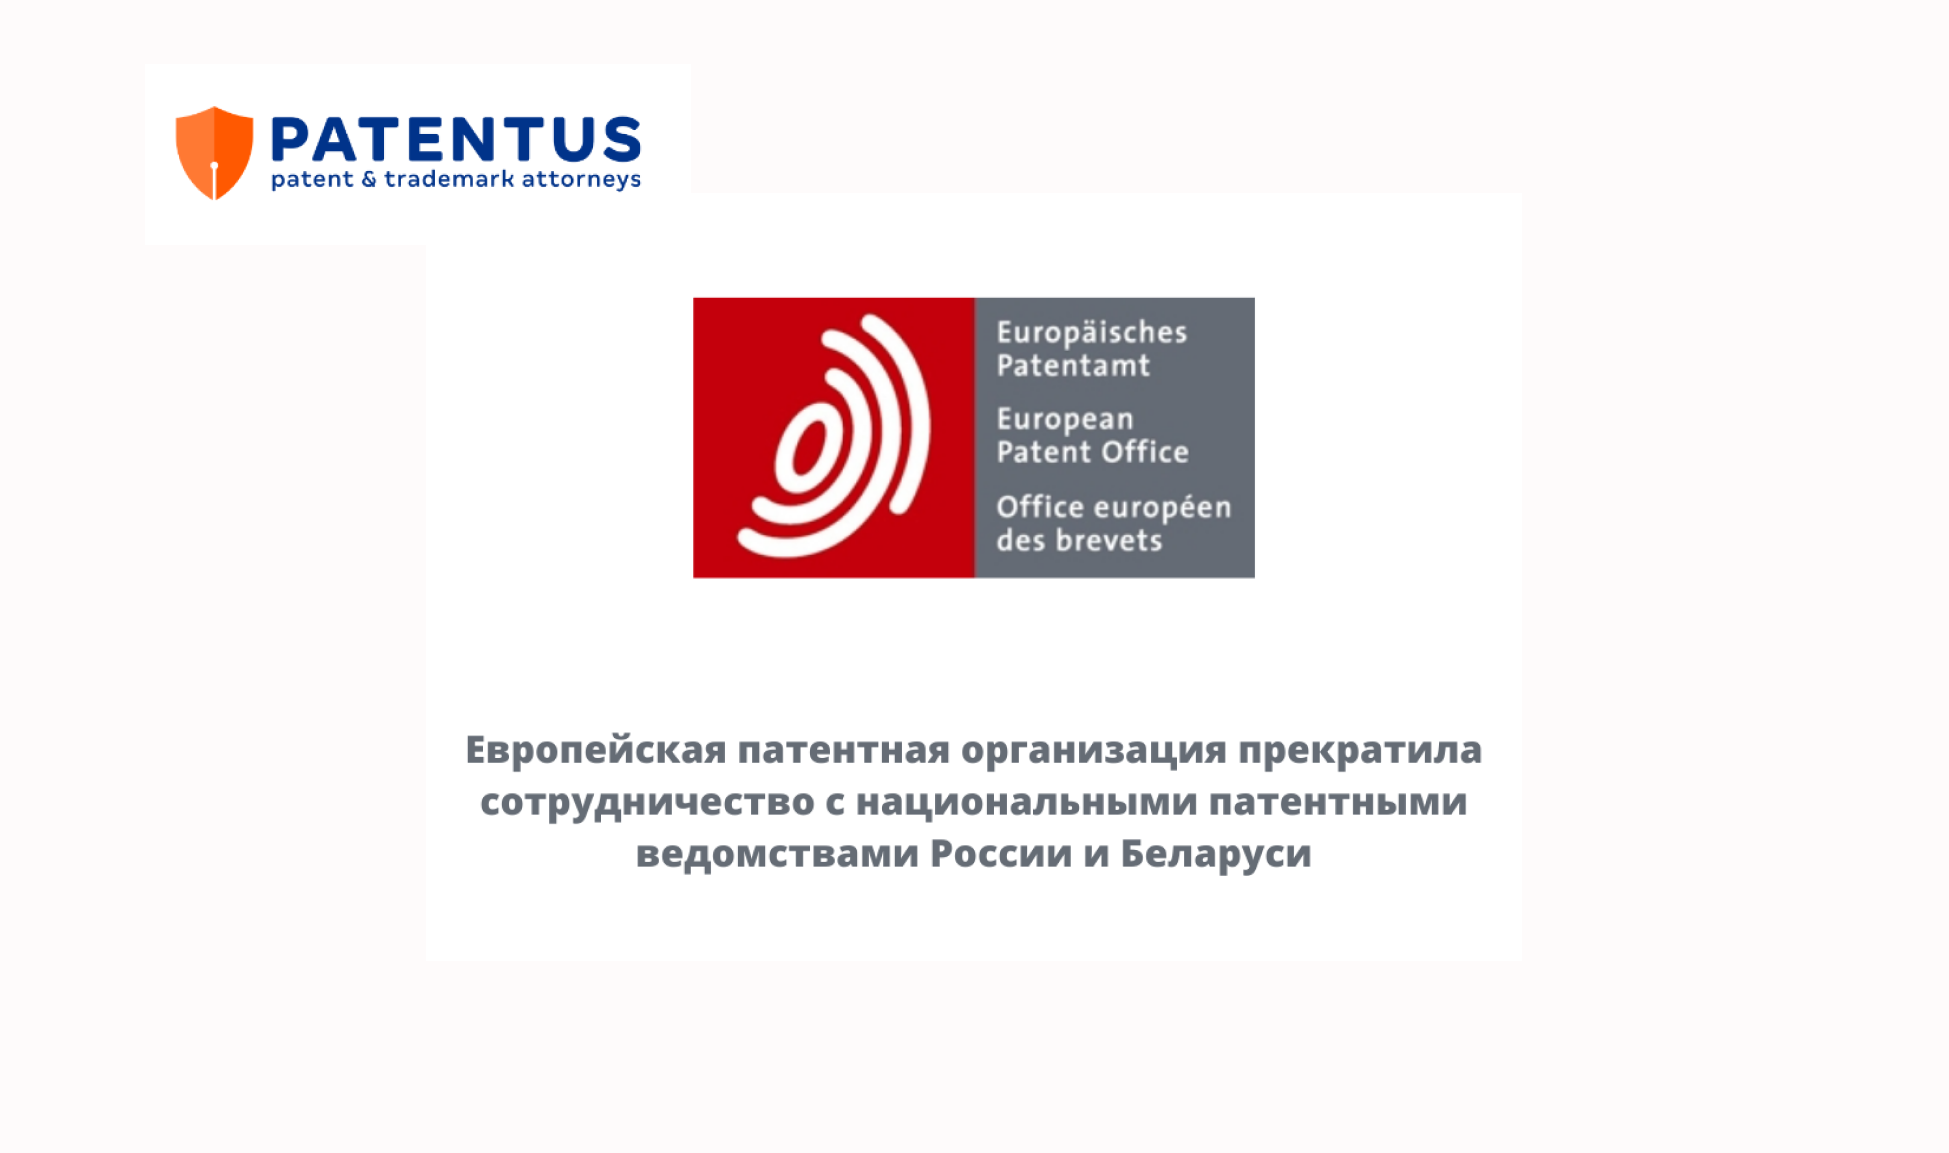 The European Patent Organization has terminated cooperation with the national patent offices of Russia and Belarus